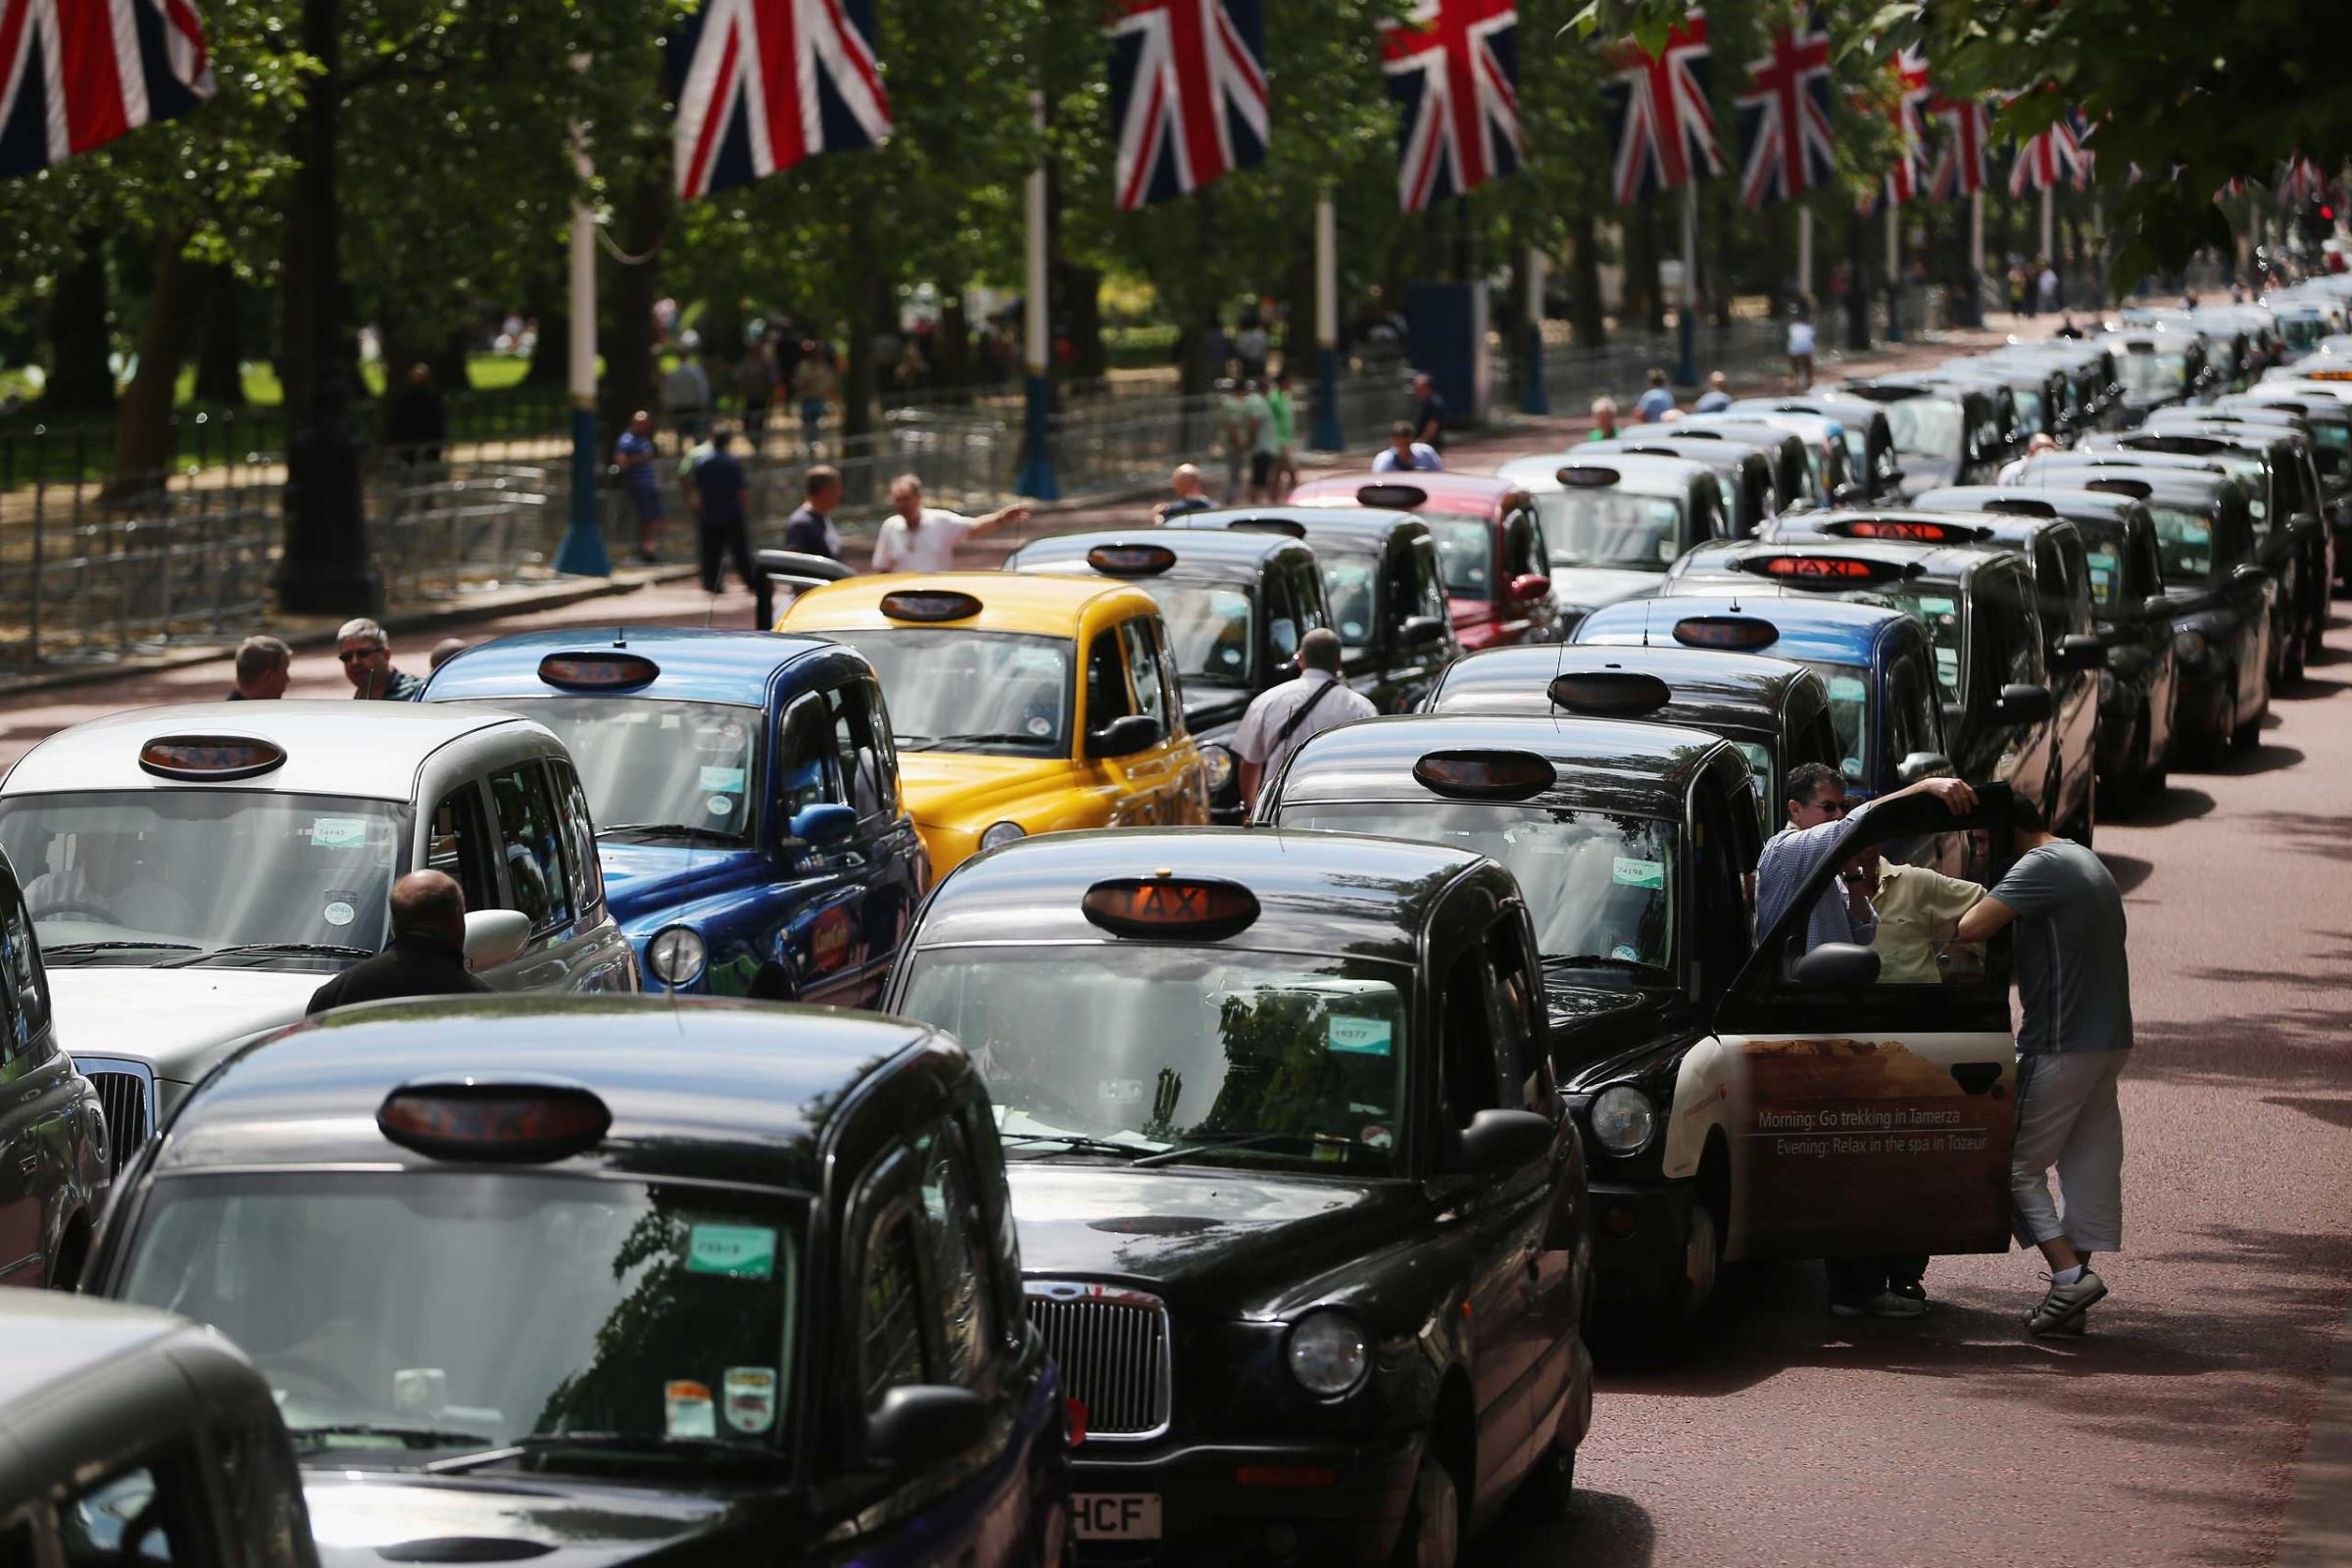 London taxi's line up on The Mall during a protest against a new smart phone app, 'Uber' on June 11, 2014 in London.